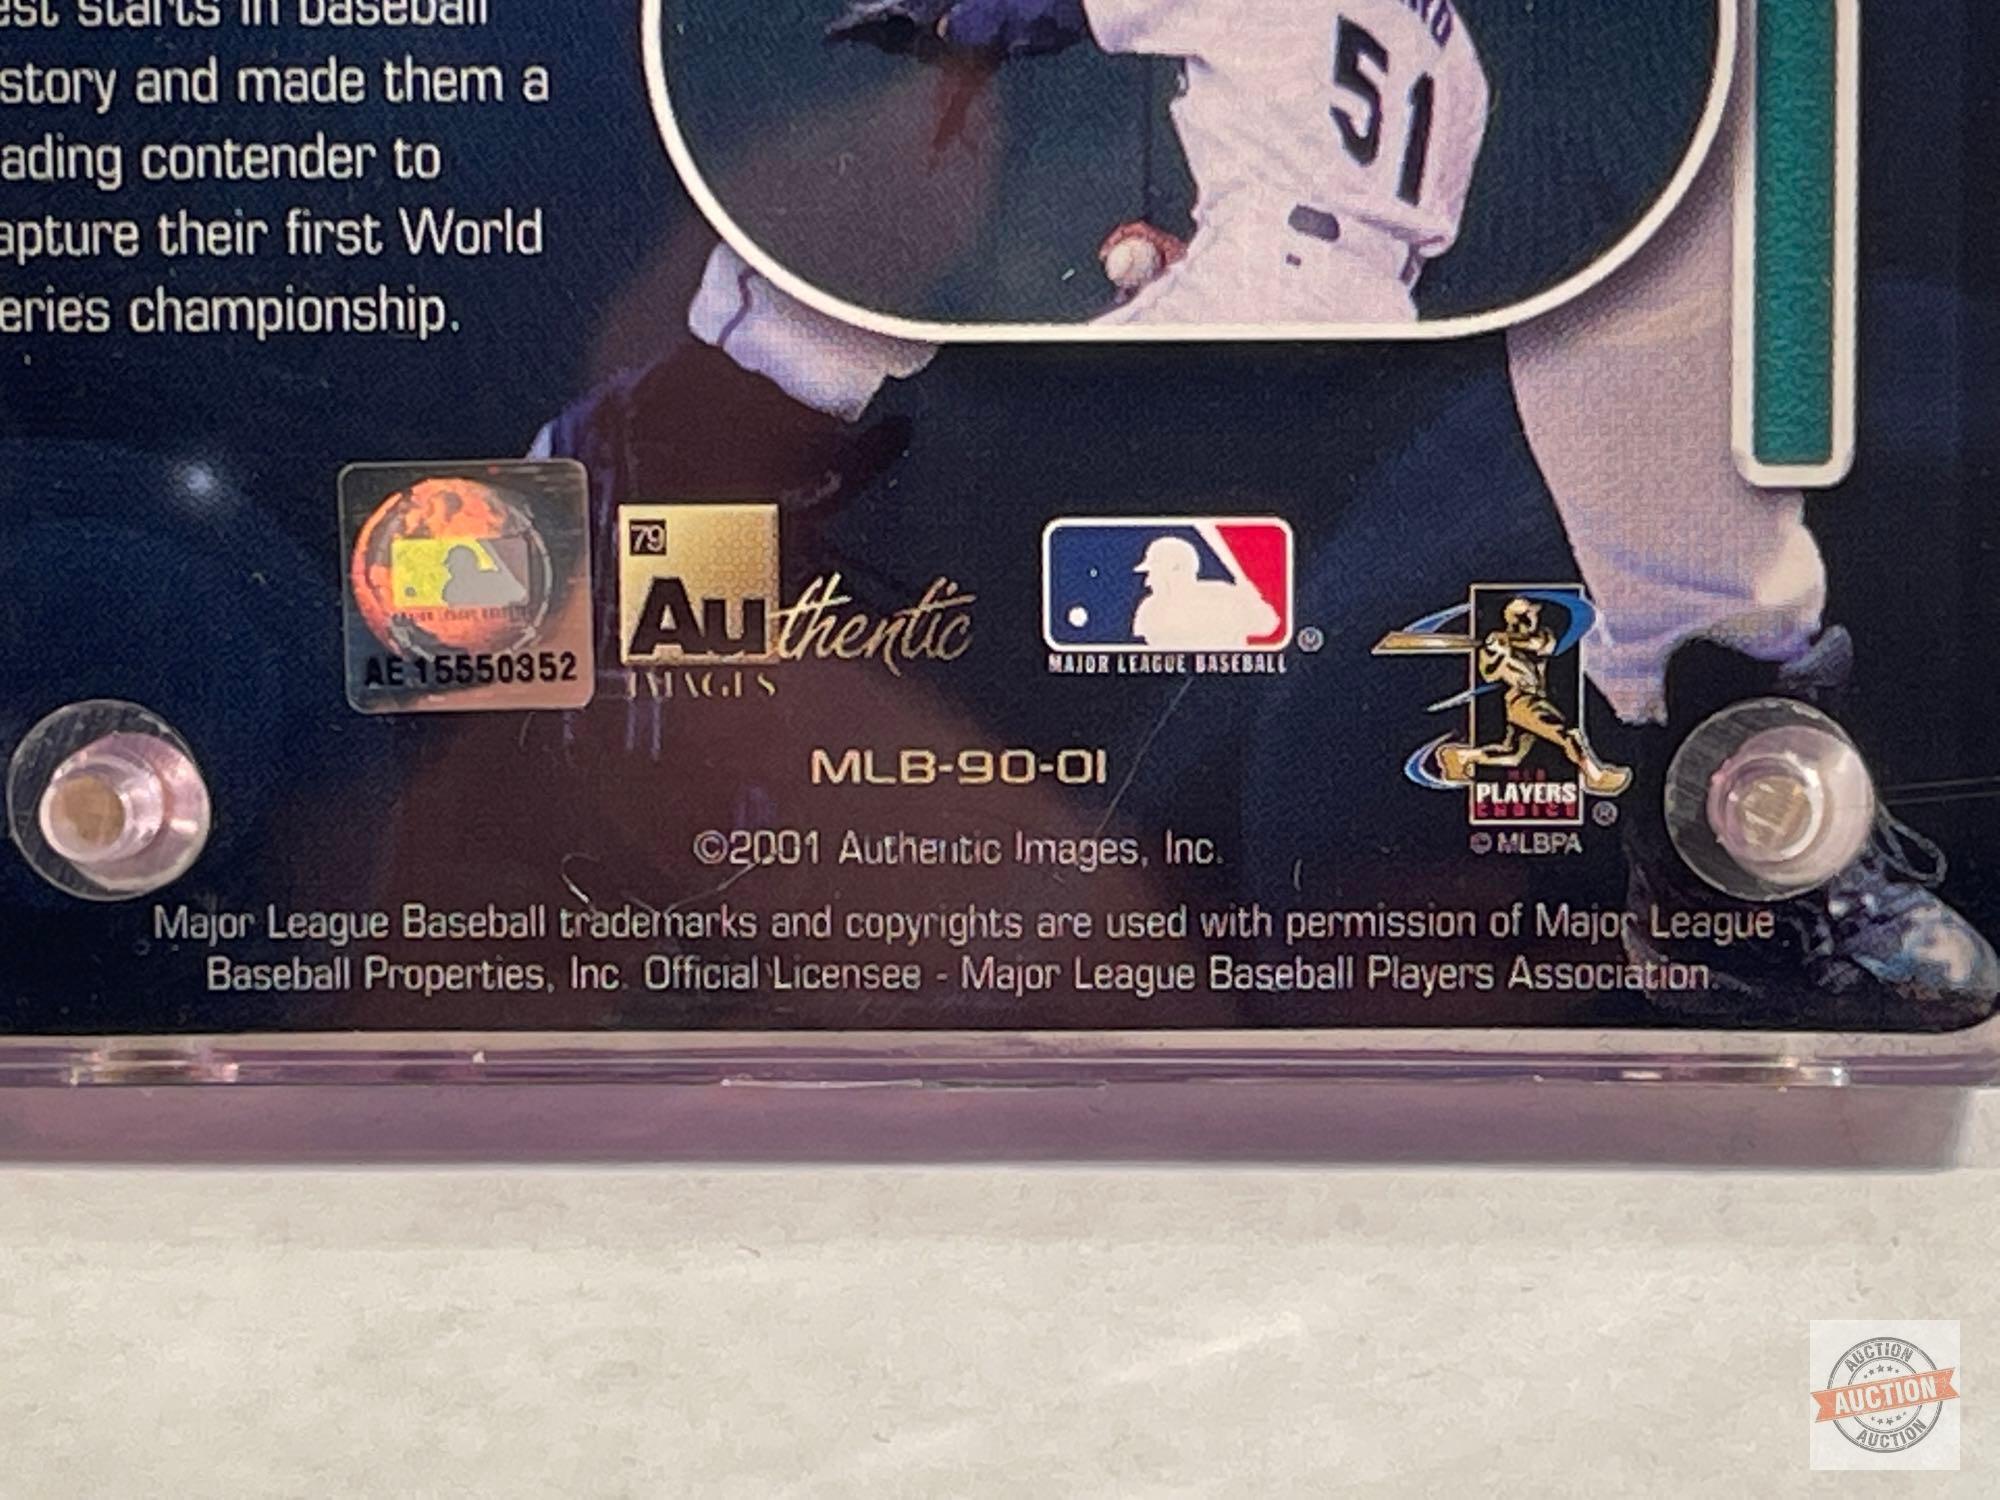 2001 All-Star Ichiro American League All-Star, Limited-Edition gold foil signature card